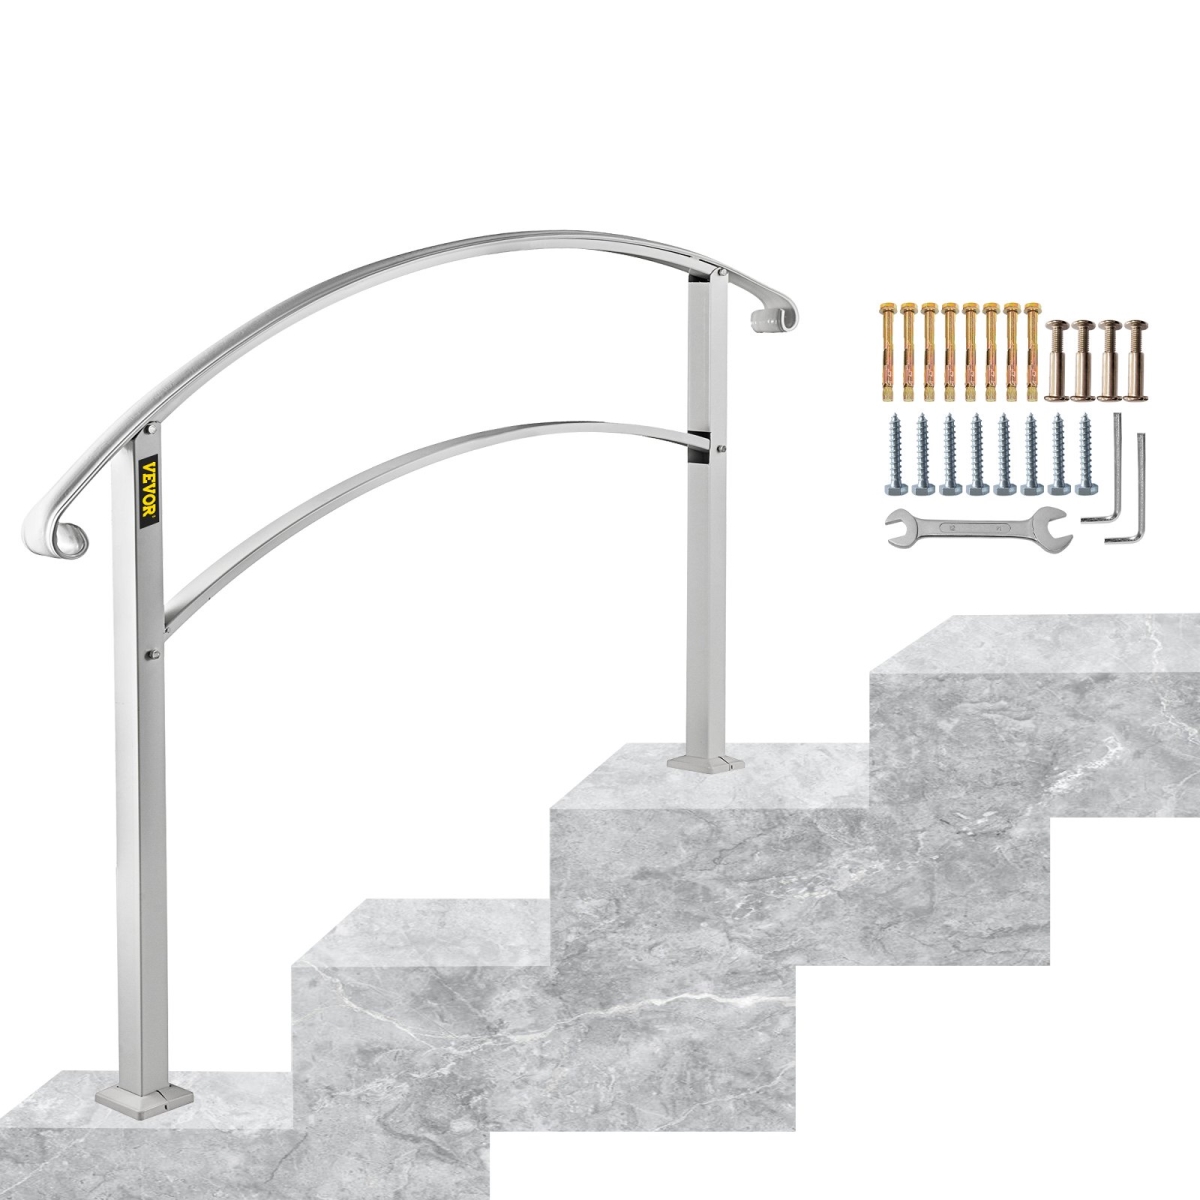 Picture of Vevor 3FTHWTYFSWHITE001V0 Handrails for Outdoor Steps Fit 1 & 3 Steps Outdoor Stair Railing